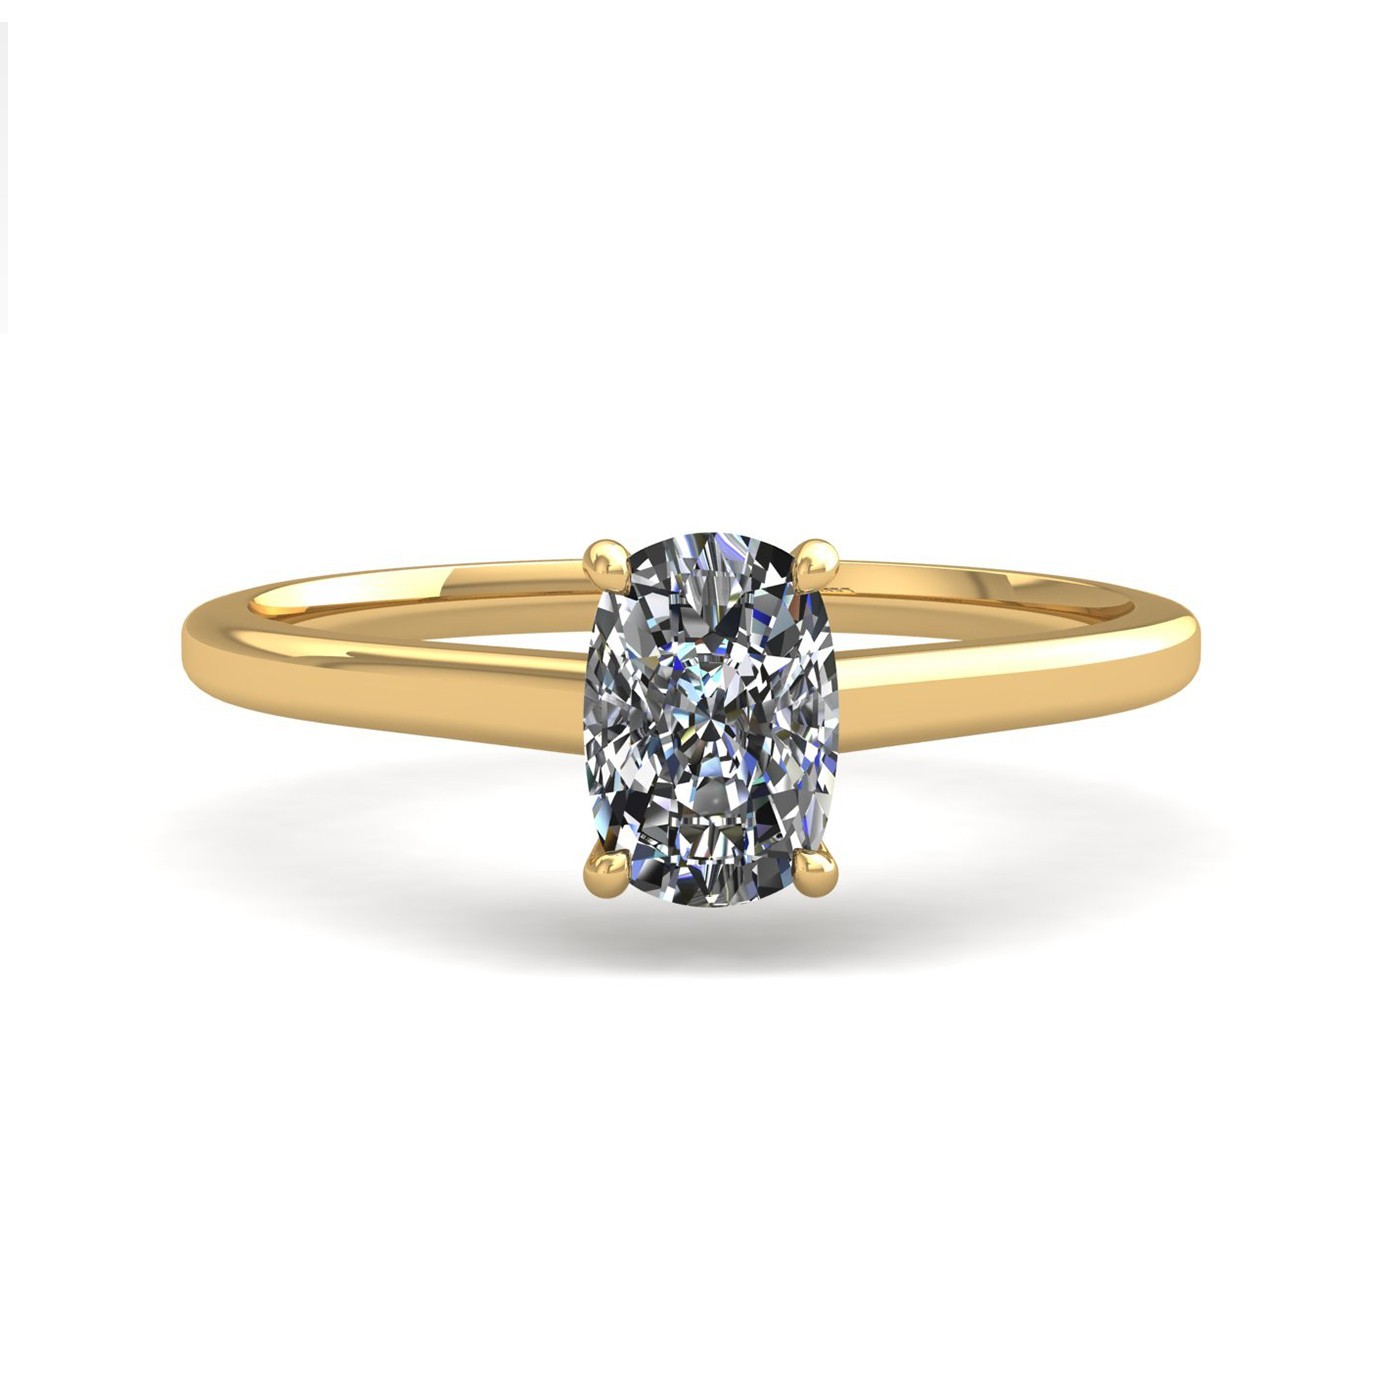 18k yellow gold  1.50 ct 4 prongs solitaire elongated cushion cut diamond engagement ring with whisper thin band Photos & images